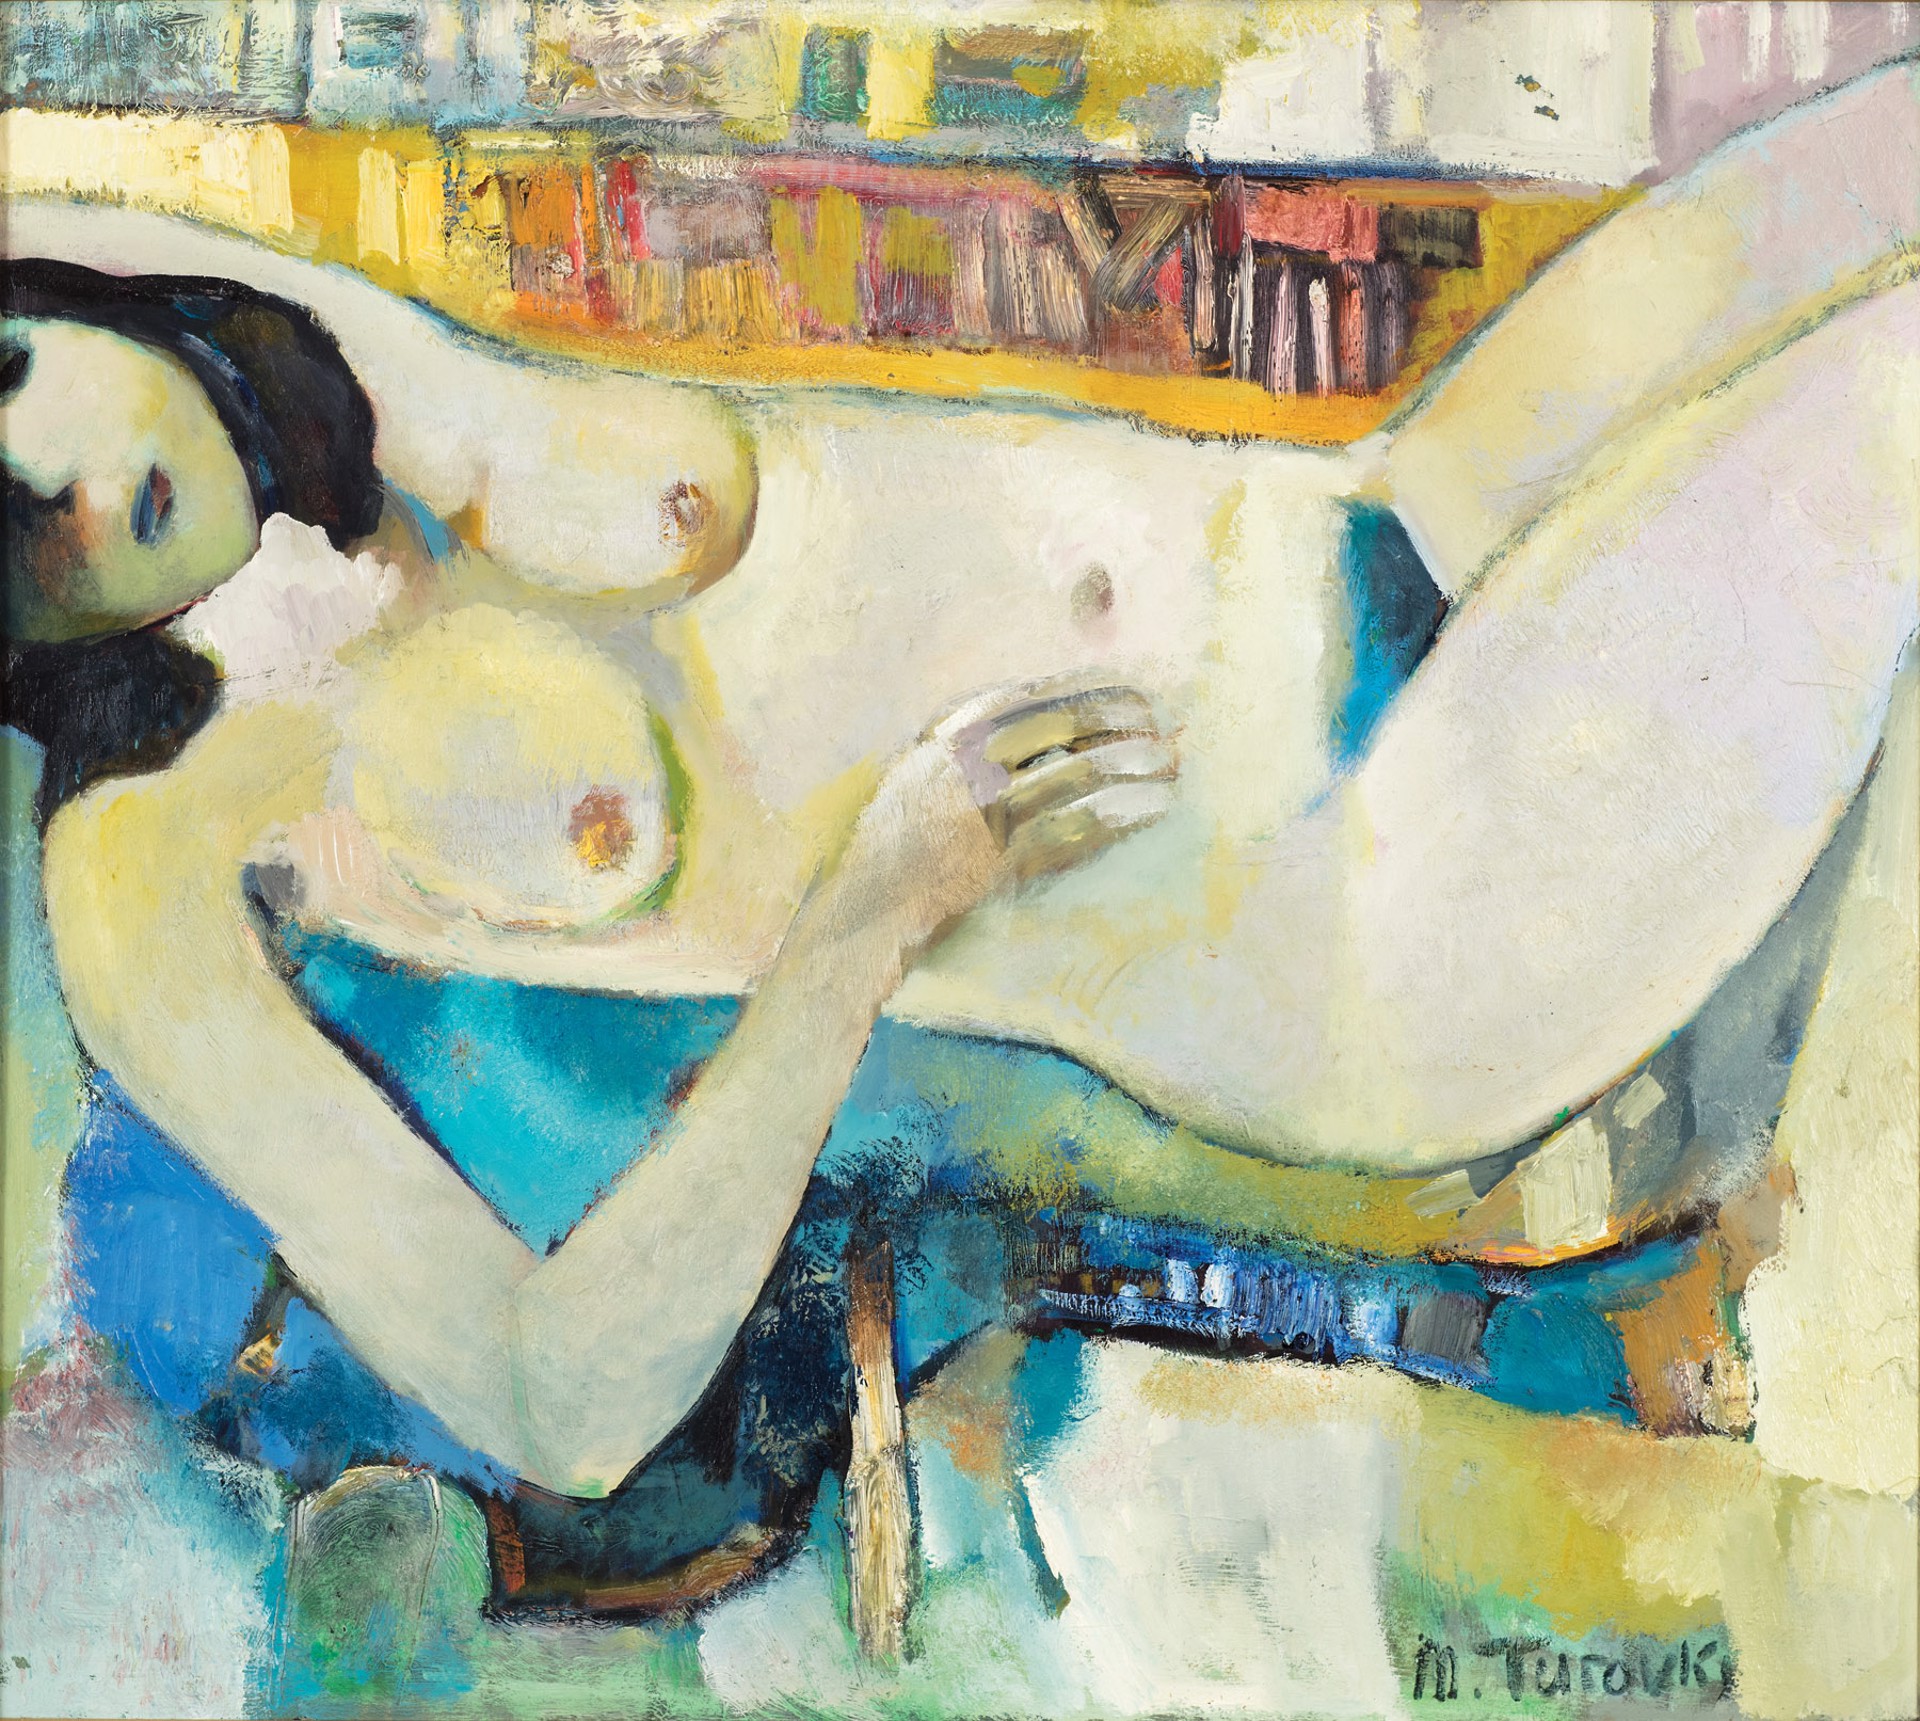 Reclining Nude, Blue and Yellow by Mikhail Turovsky